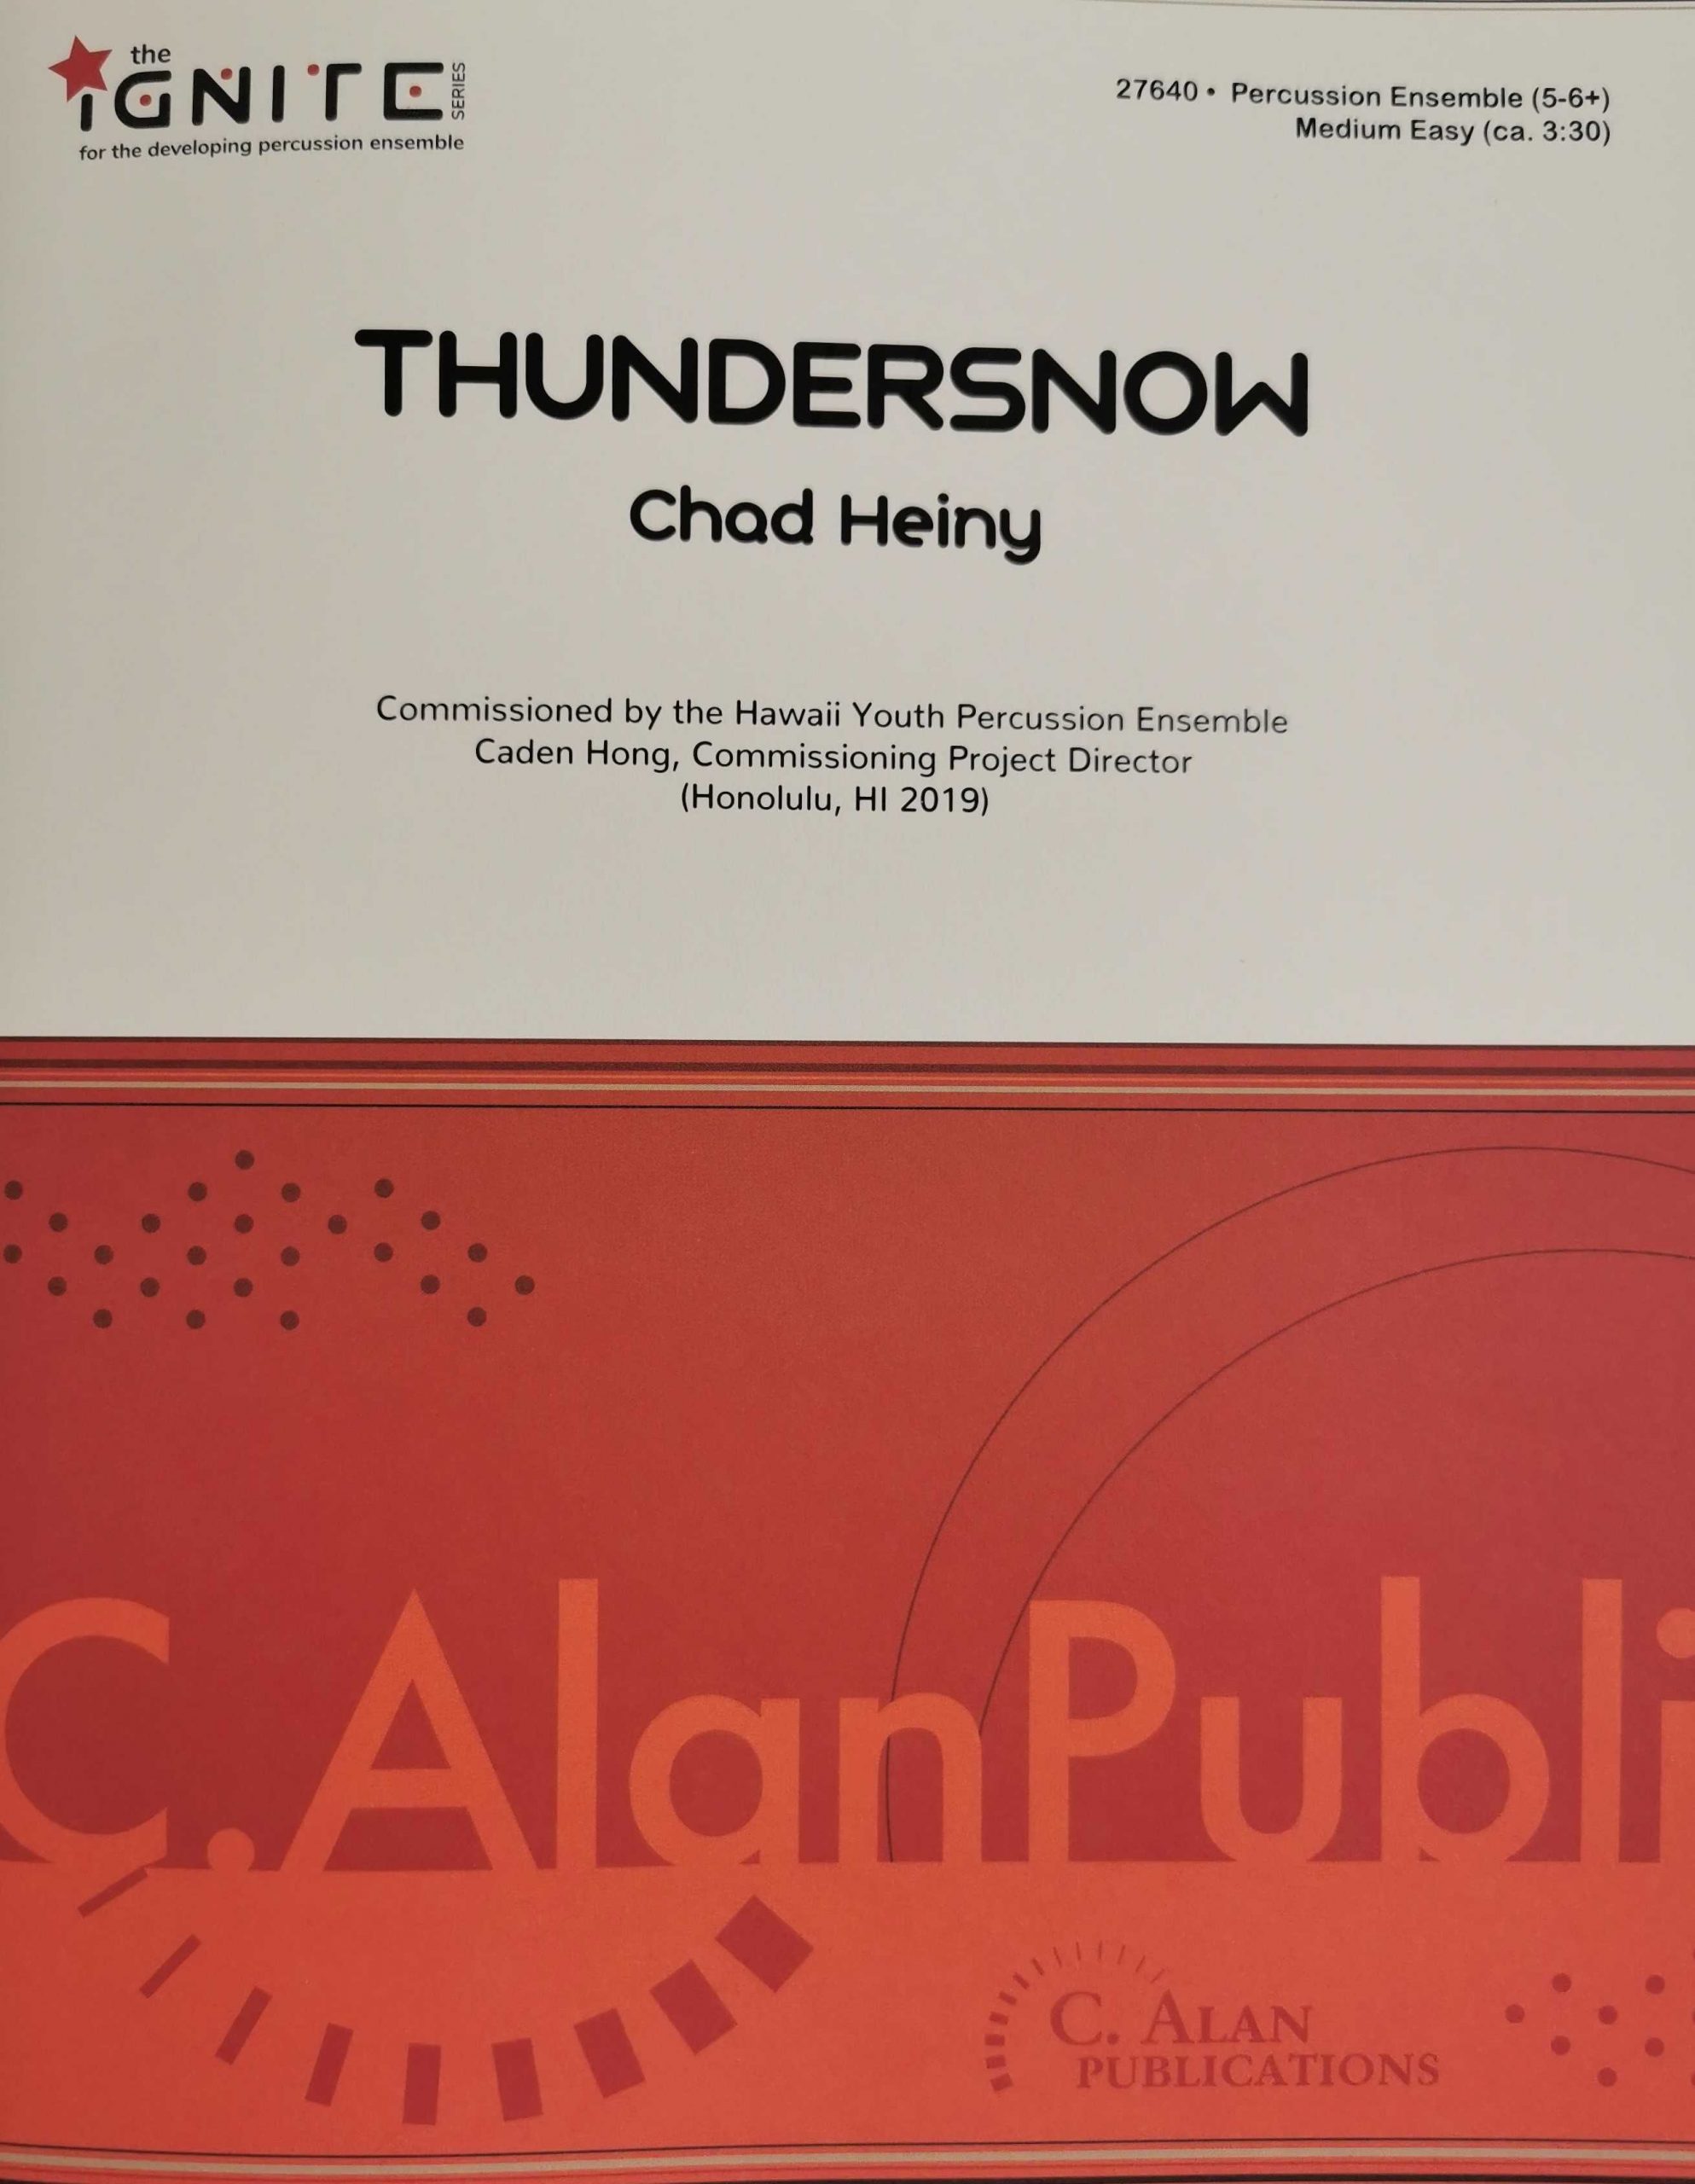 Thundersnow by Chad Heiny